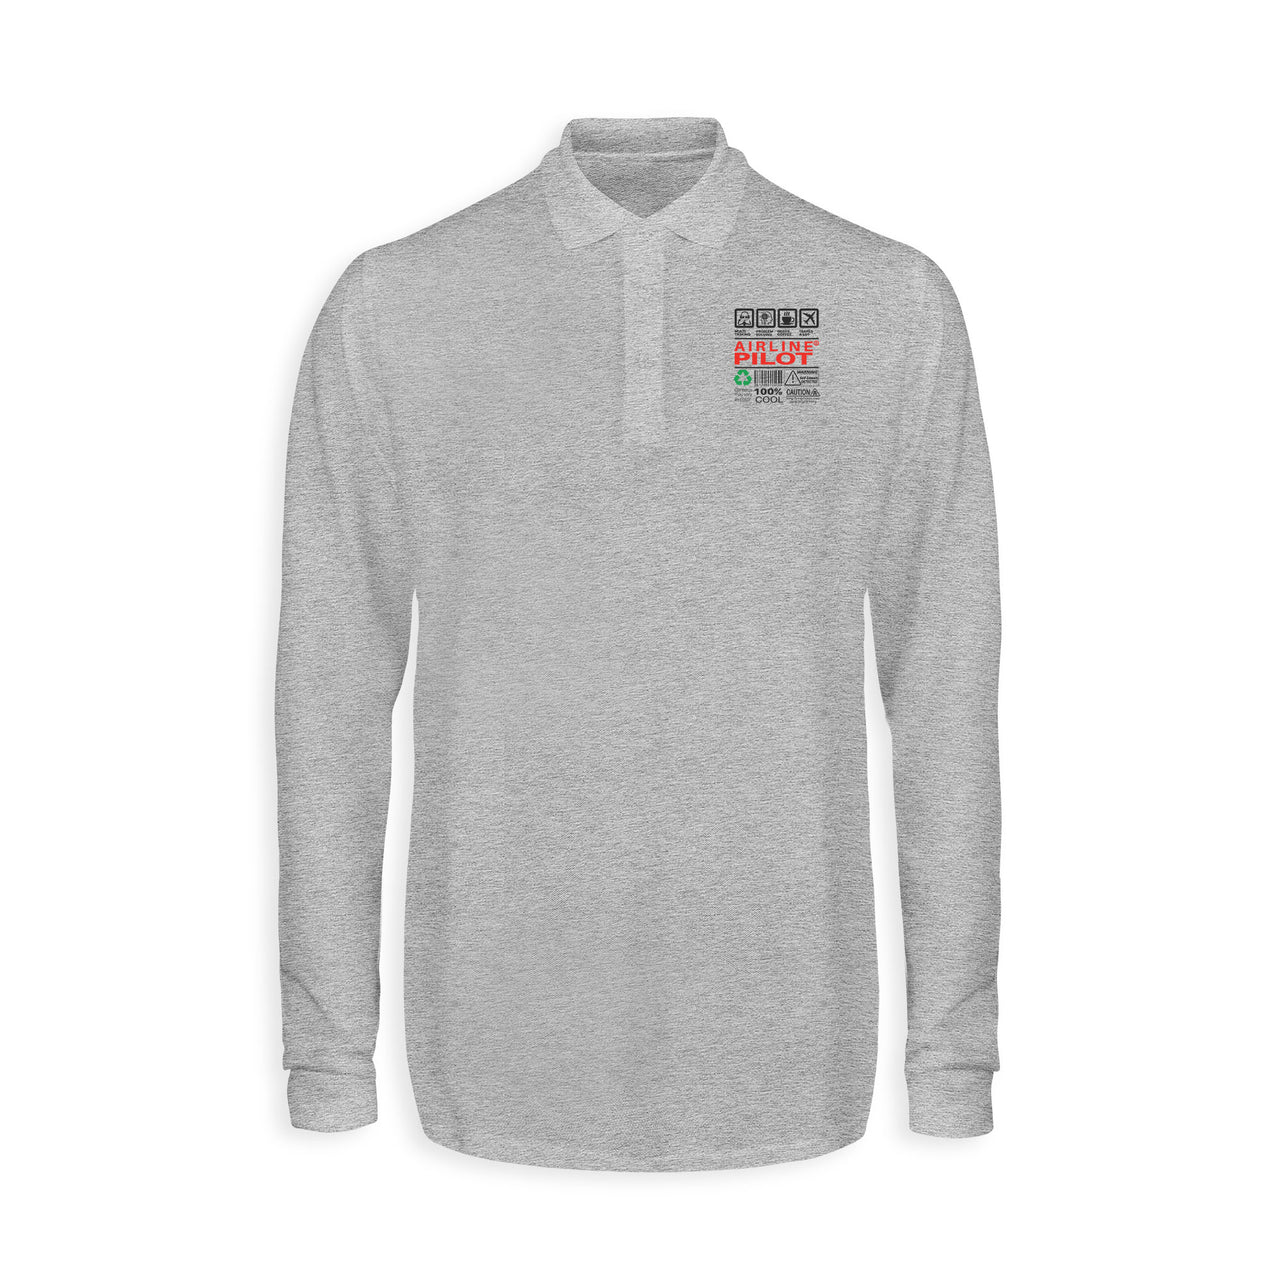 Airline Pilot Label Designed Long Sleeve Polo T-Shirts